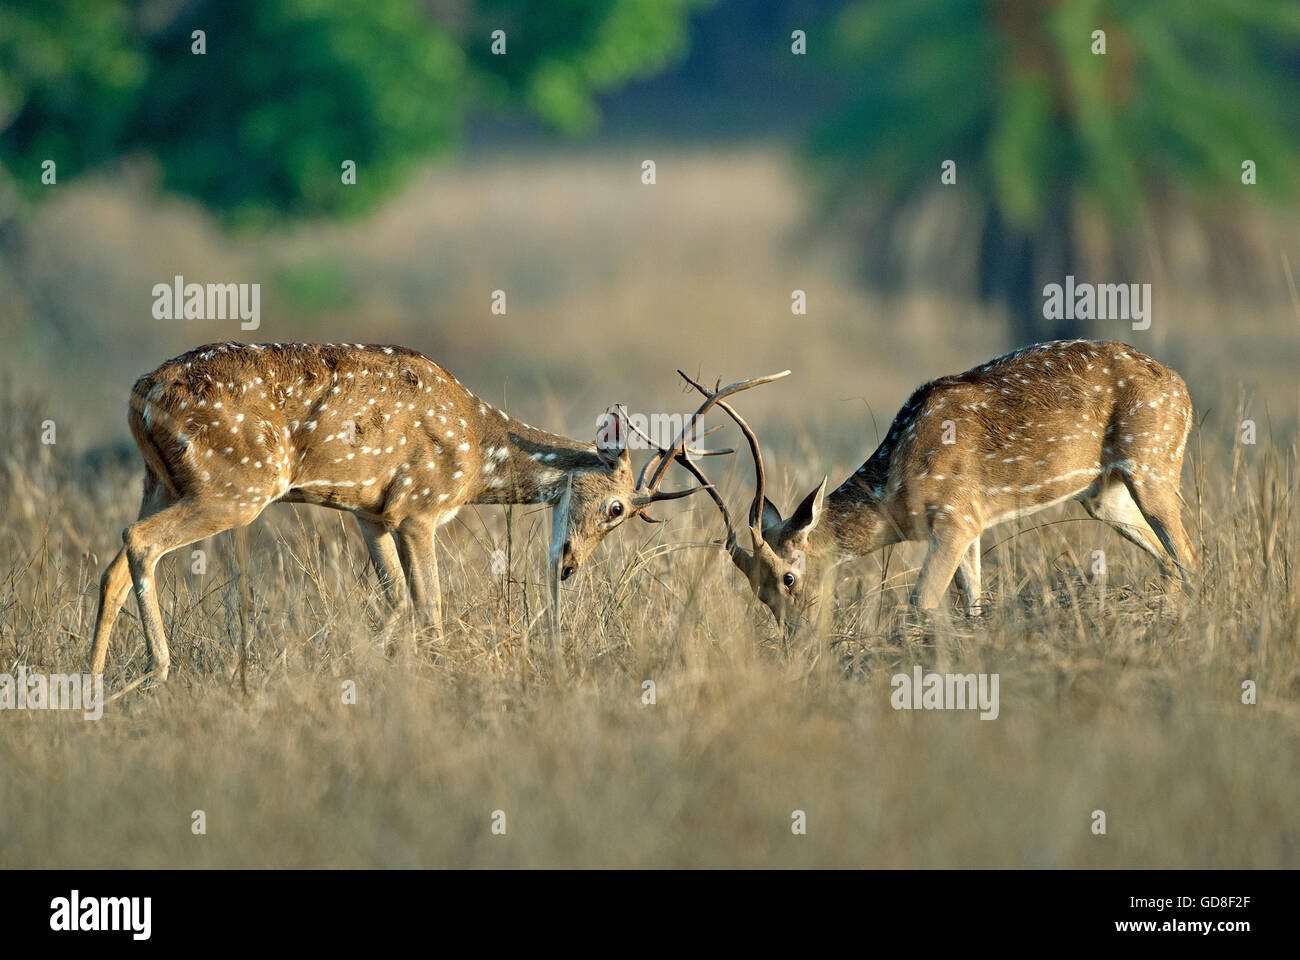 The image of Spotted deer ( Axis axis ) fight , Bandavgarh national park, India Stock Photo